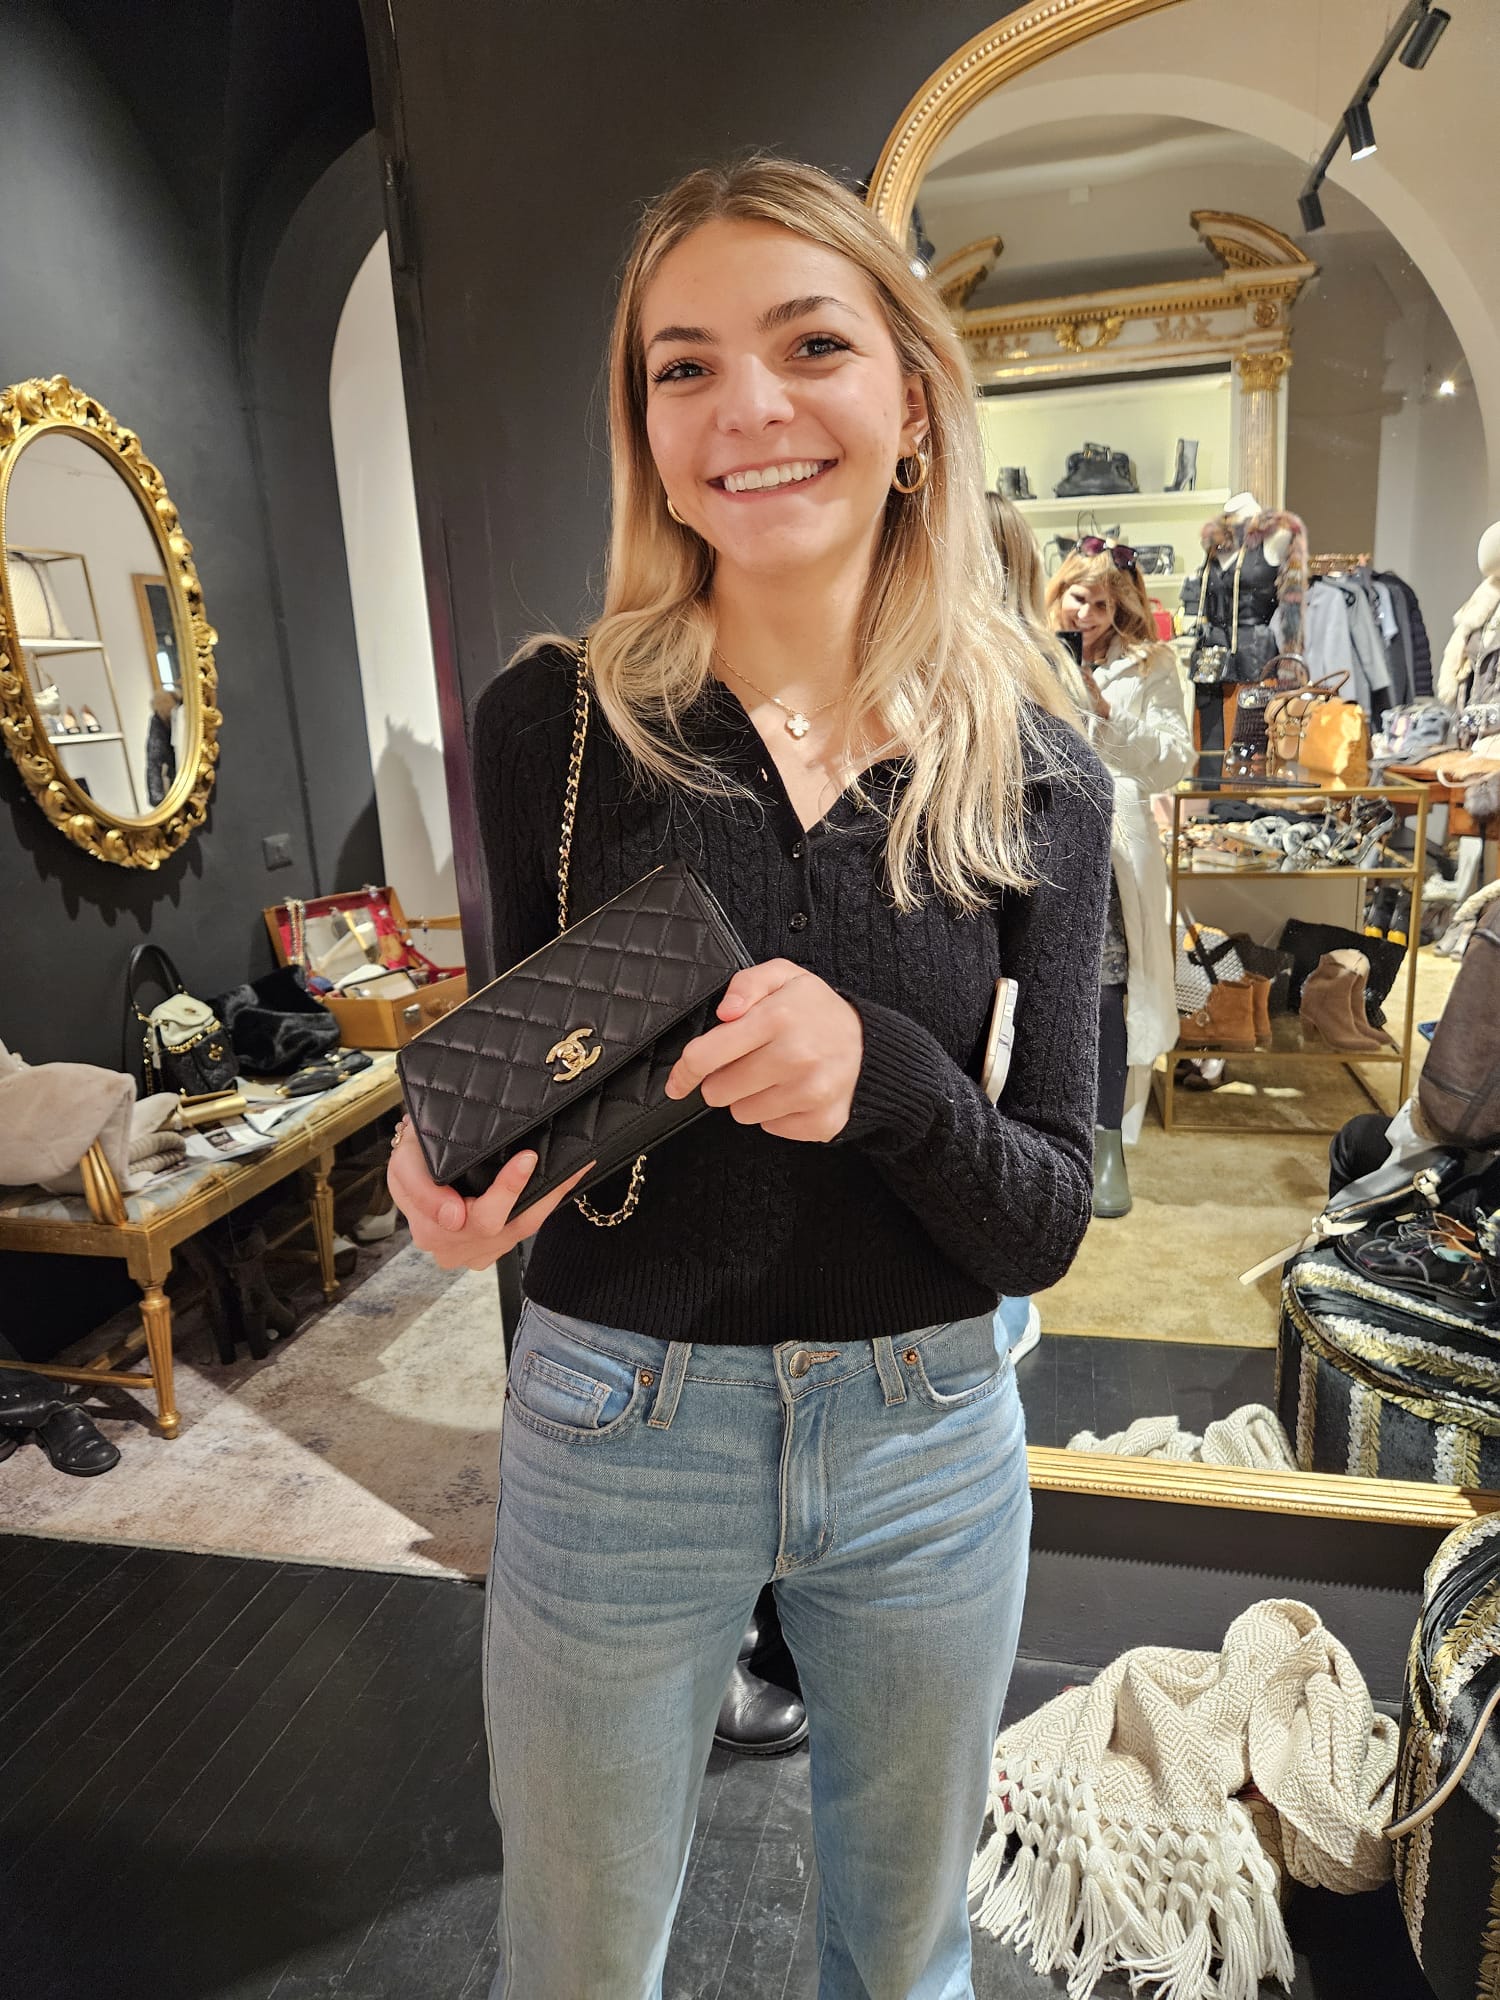 A customer with her newly purchased Chanel bag in Florence